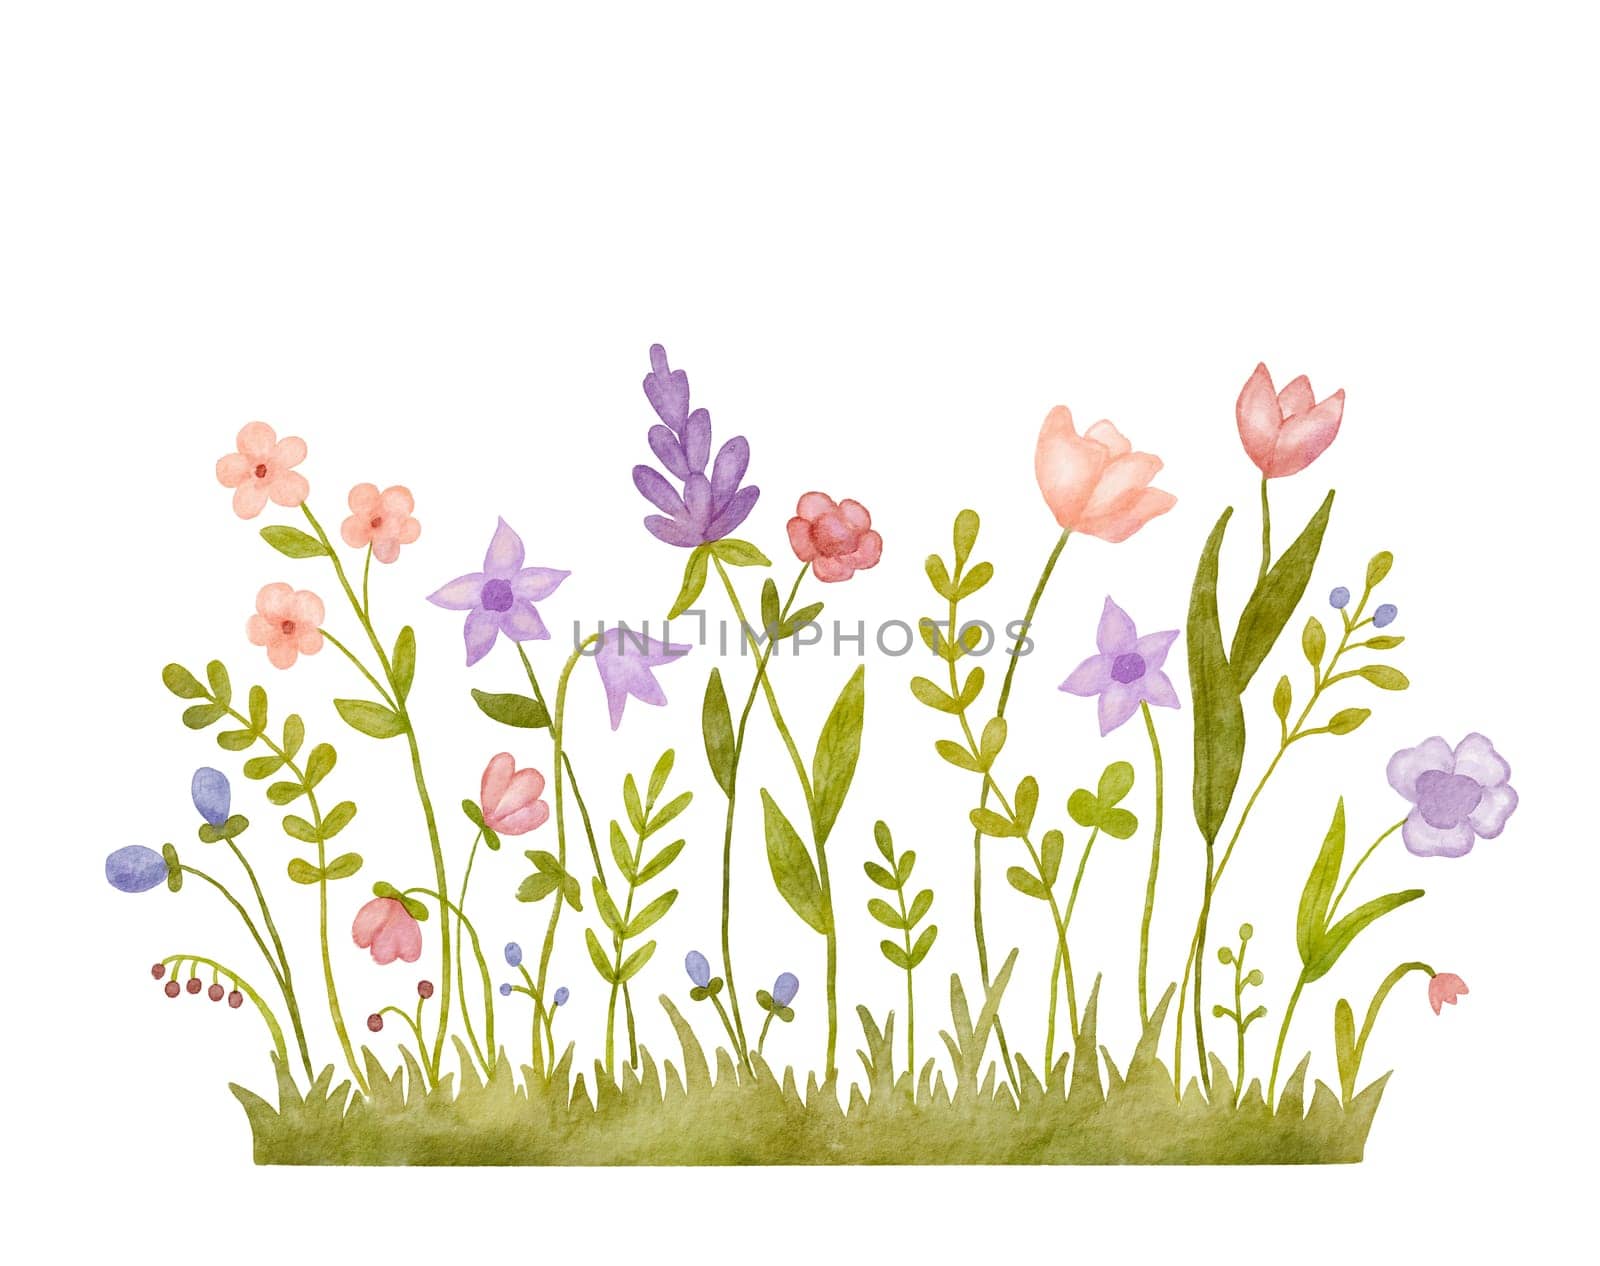 Watercolor wild herbs and flowers illustration. Hand painted meadow with grass and wildflowers isolated on white by ElenaPlatova